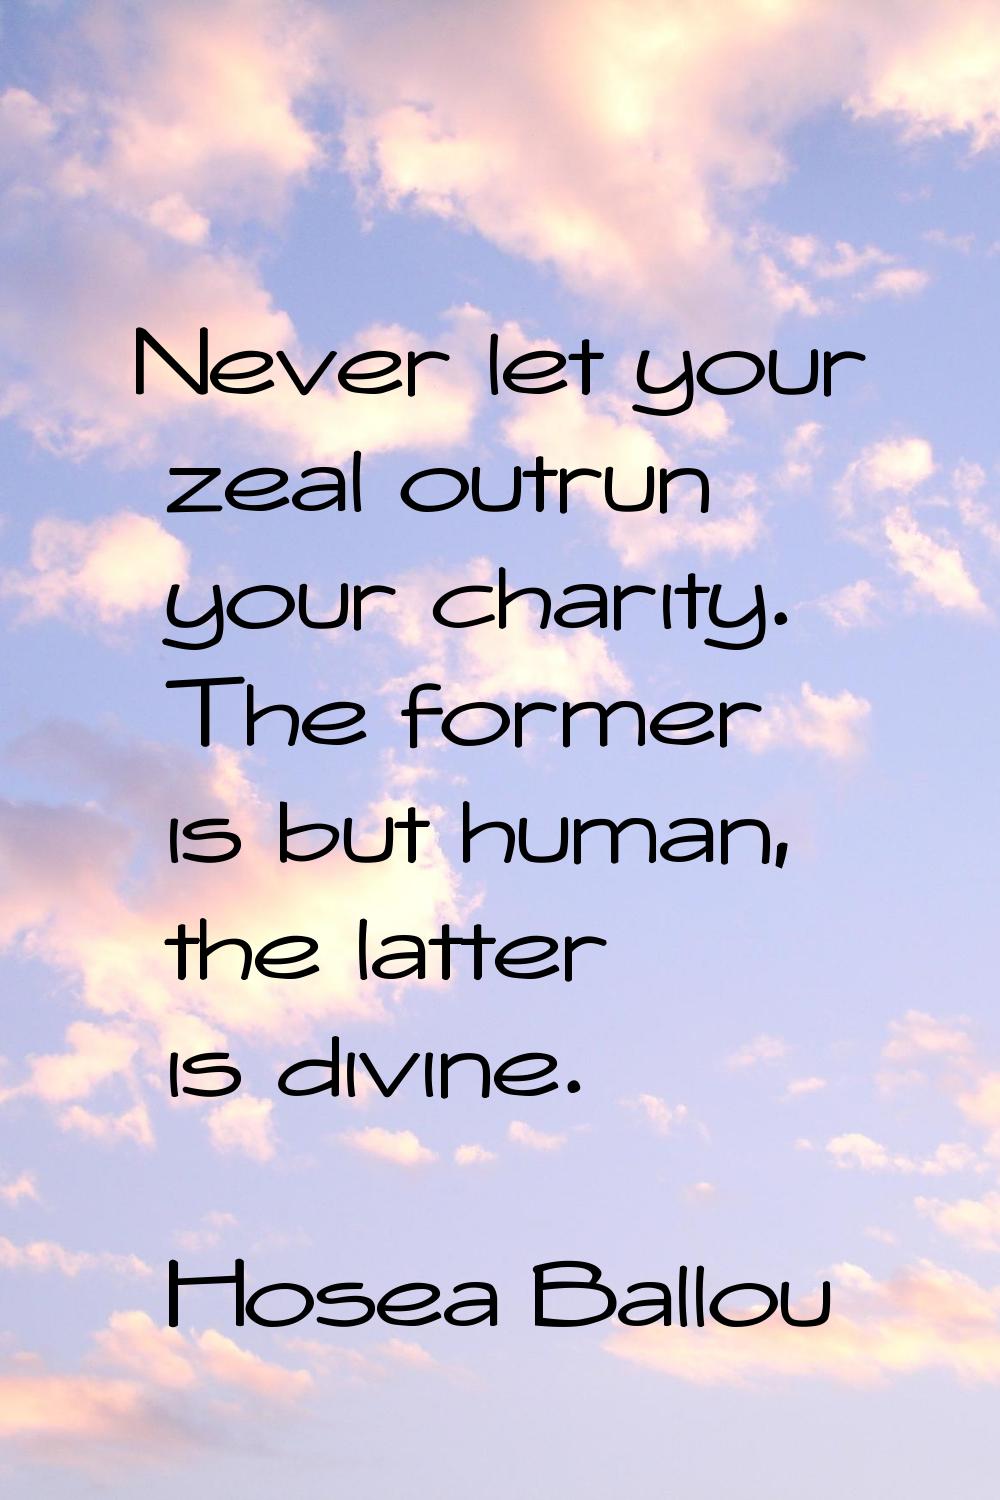 Never let your zeal outrun your charity. The former is but human, the latter is divine.